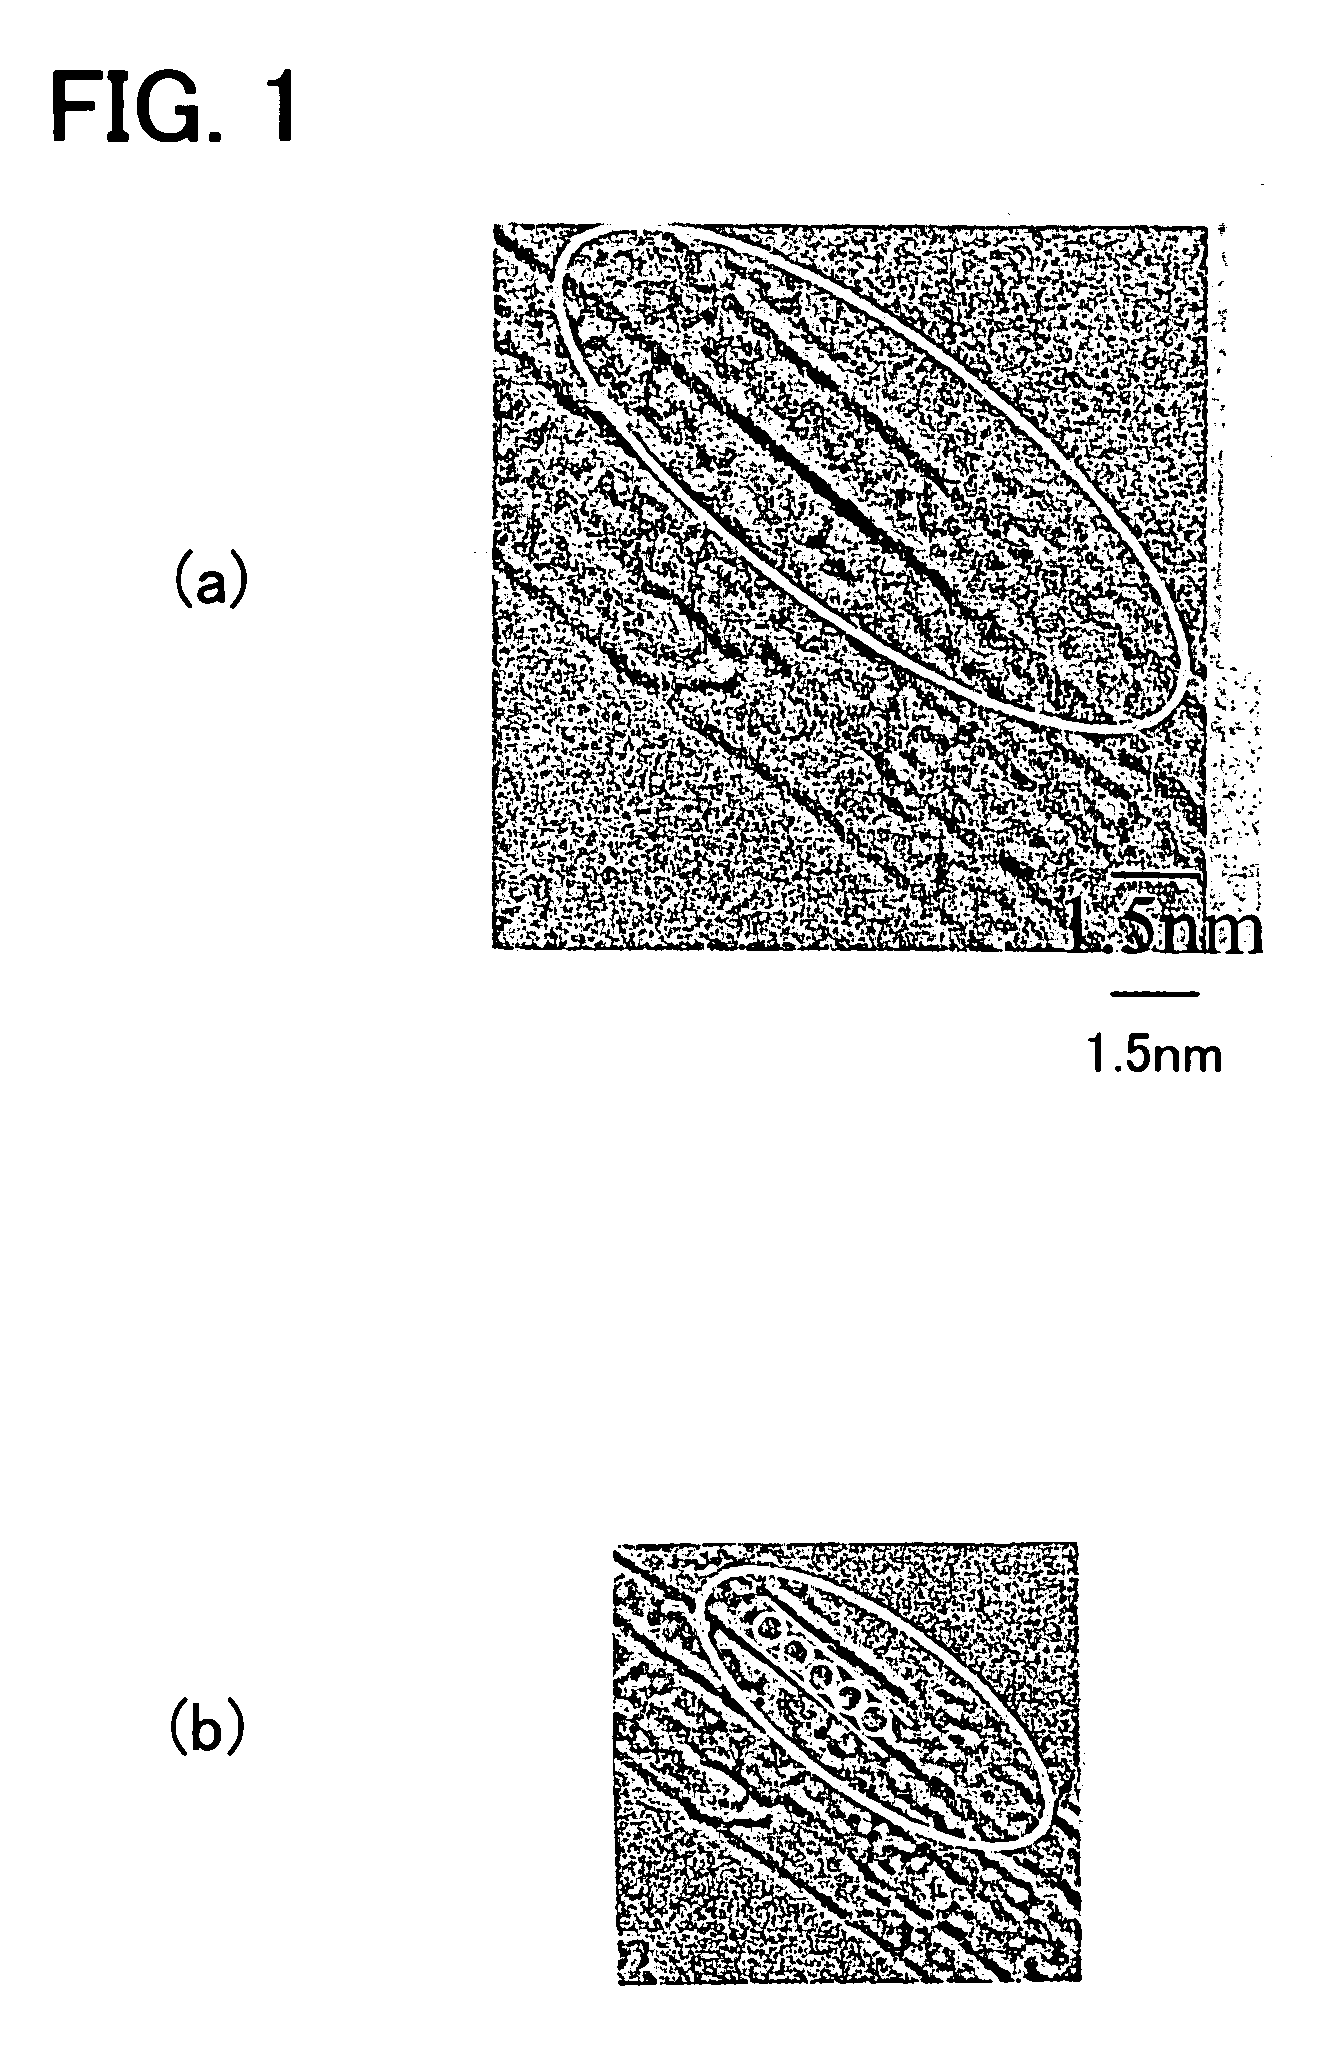 Methods for manufacturing multi-wall carbon nanotubes